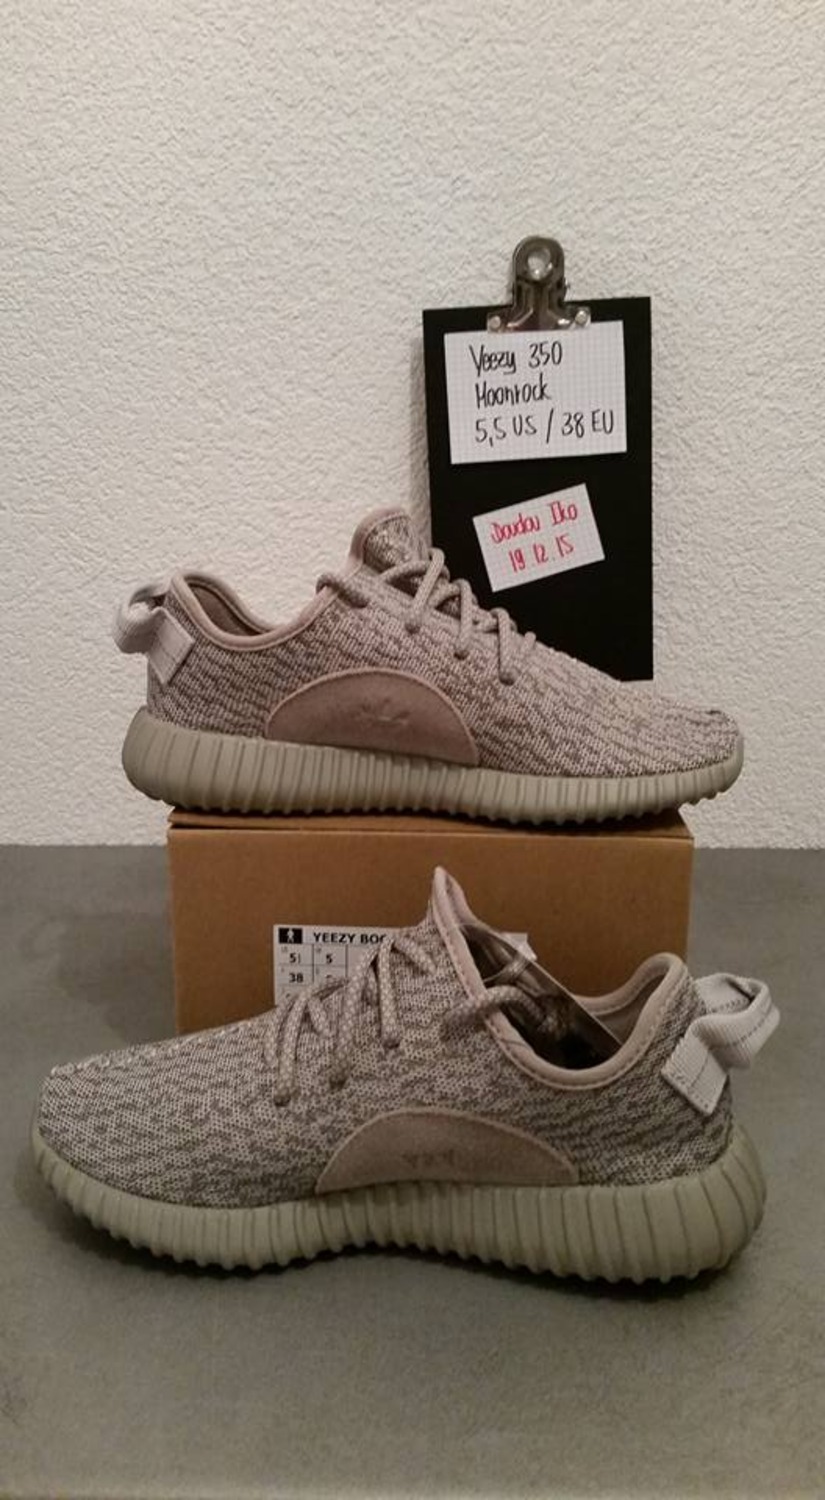 Yeezy Boost 350 Moonrock Links and Release Info Another Nike Bot